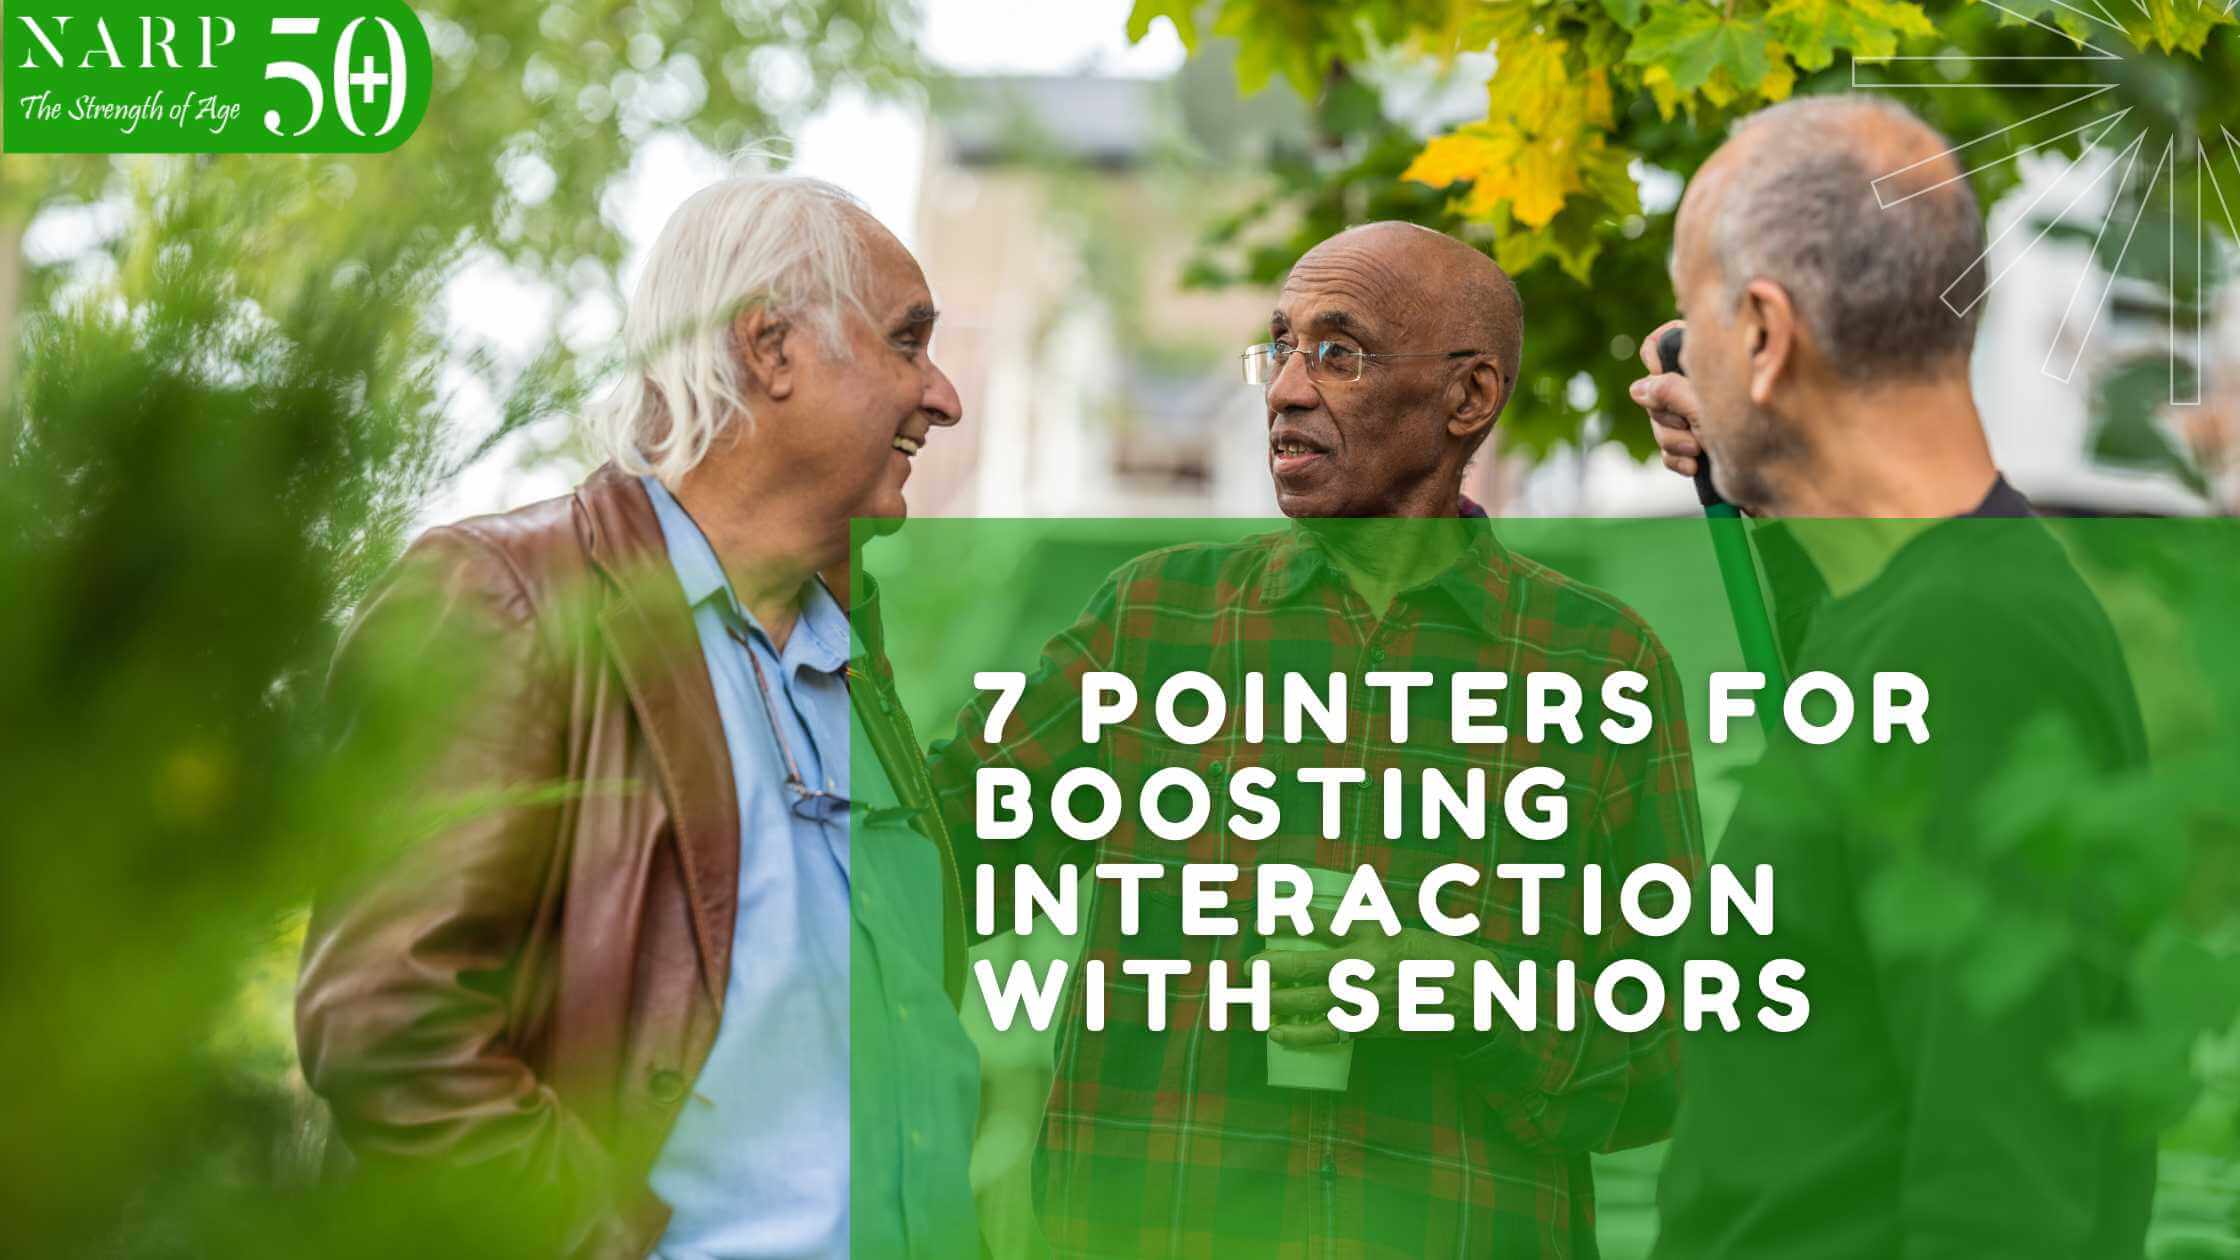 7 Pointers for Boosting Interaction with Seniors